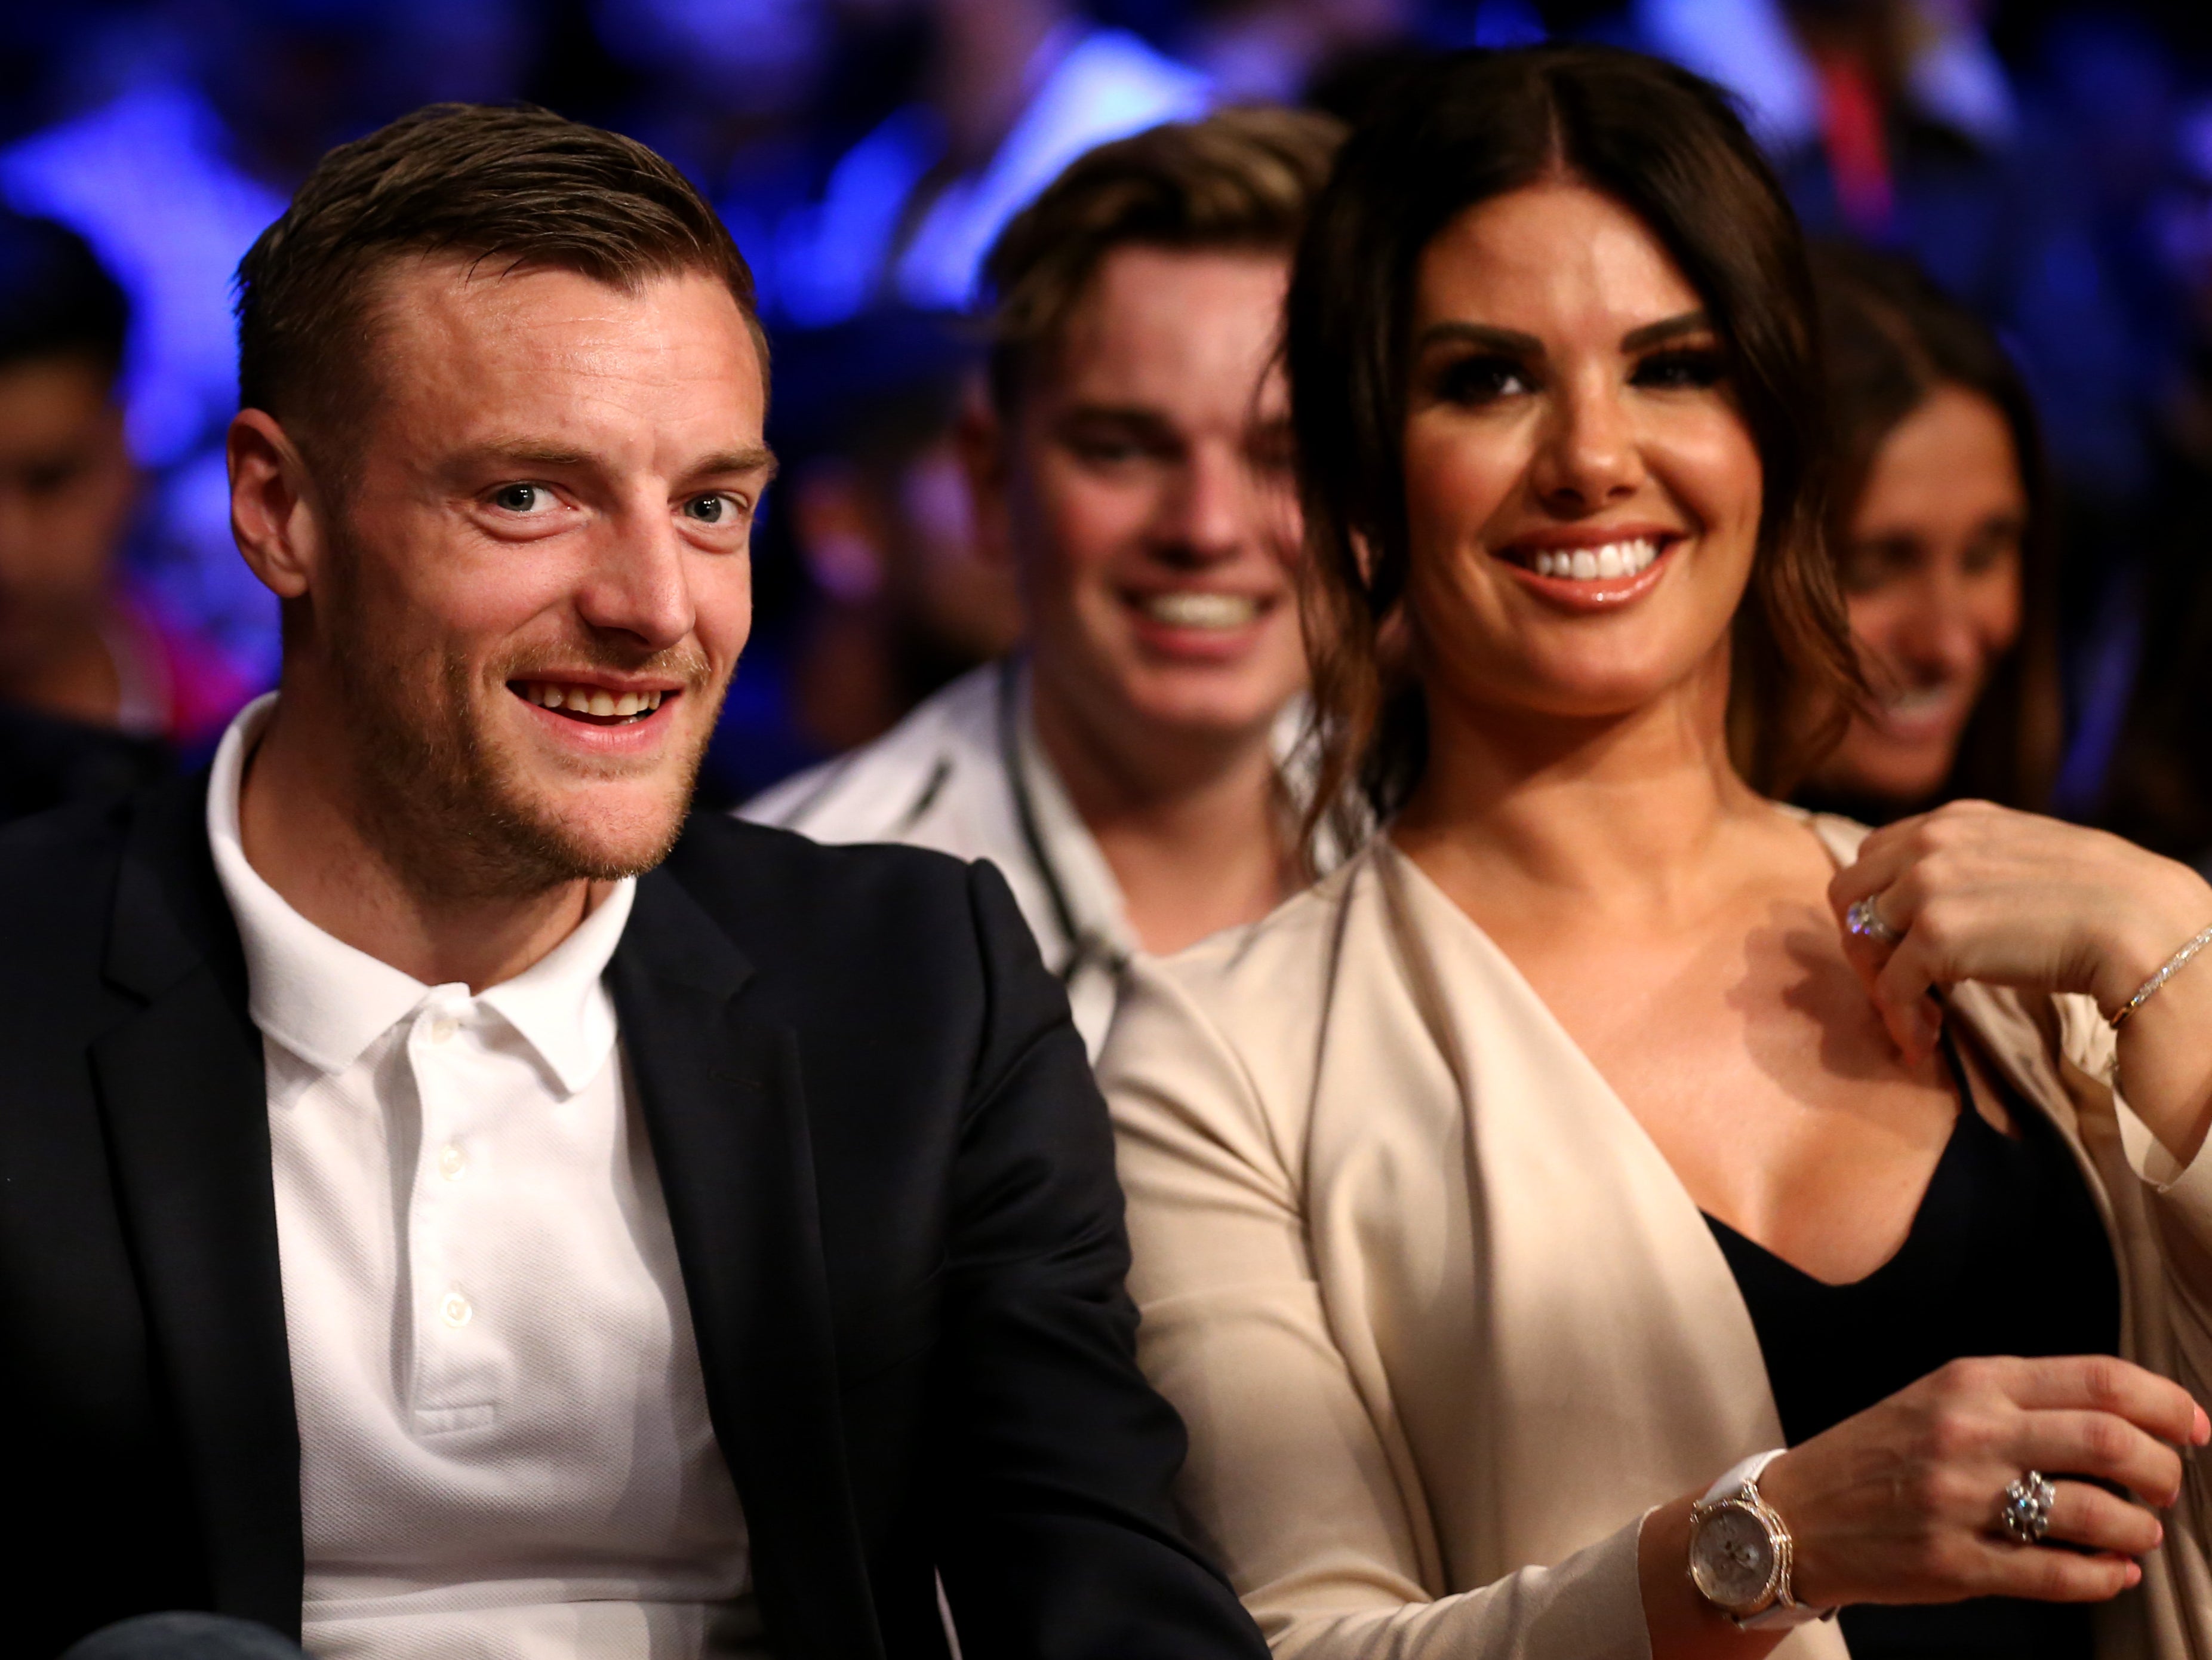 Leicester City striker Jamie Vardy with his wife, pictured in 2018